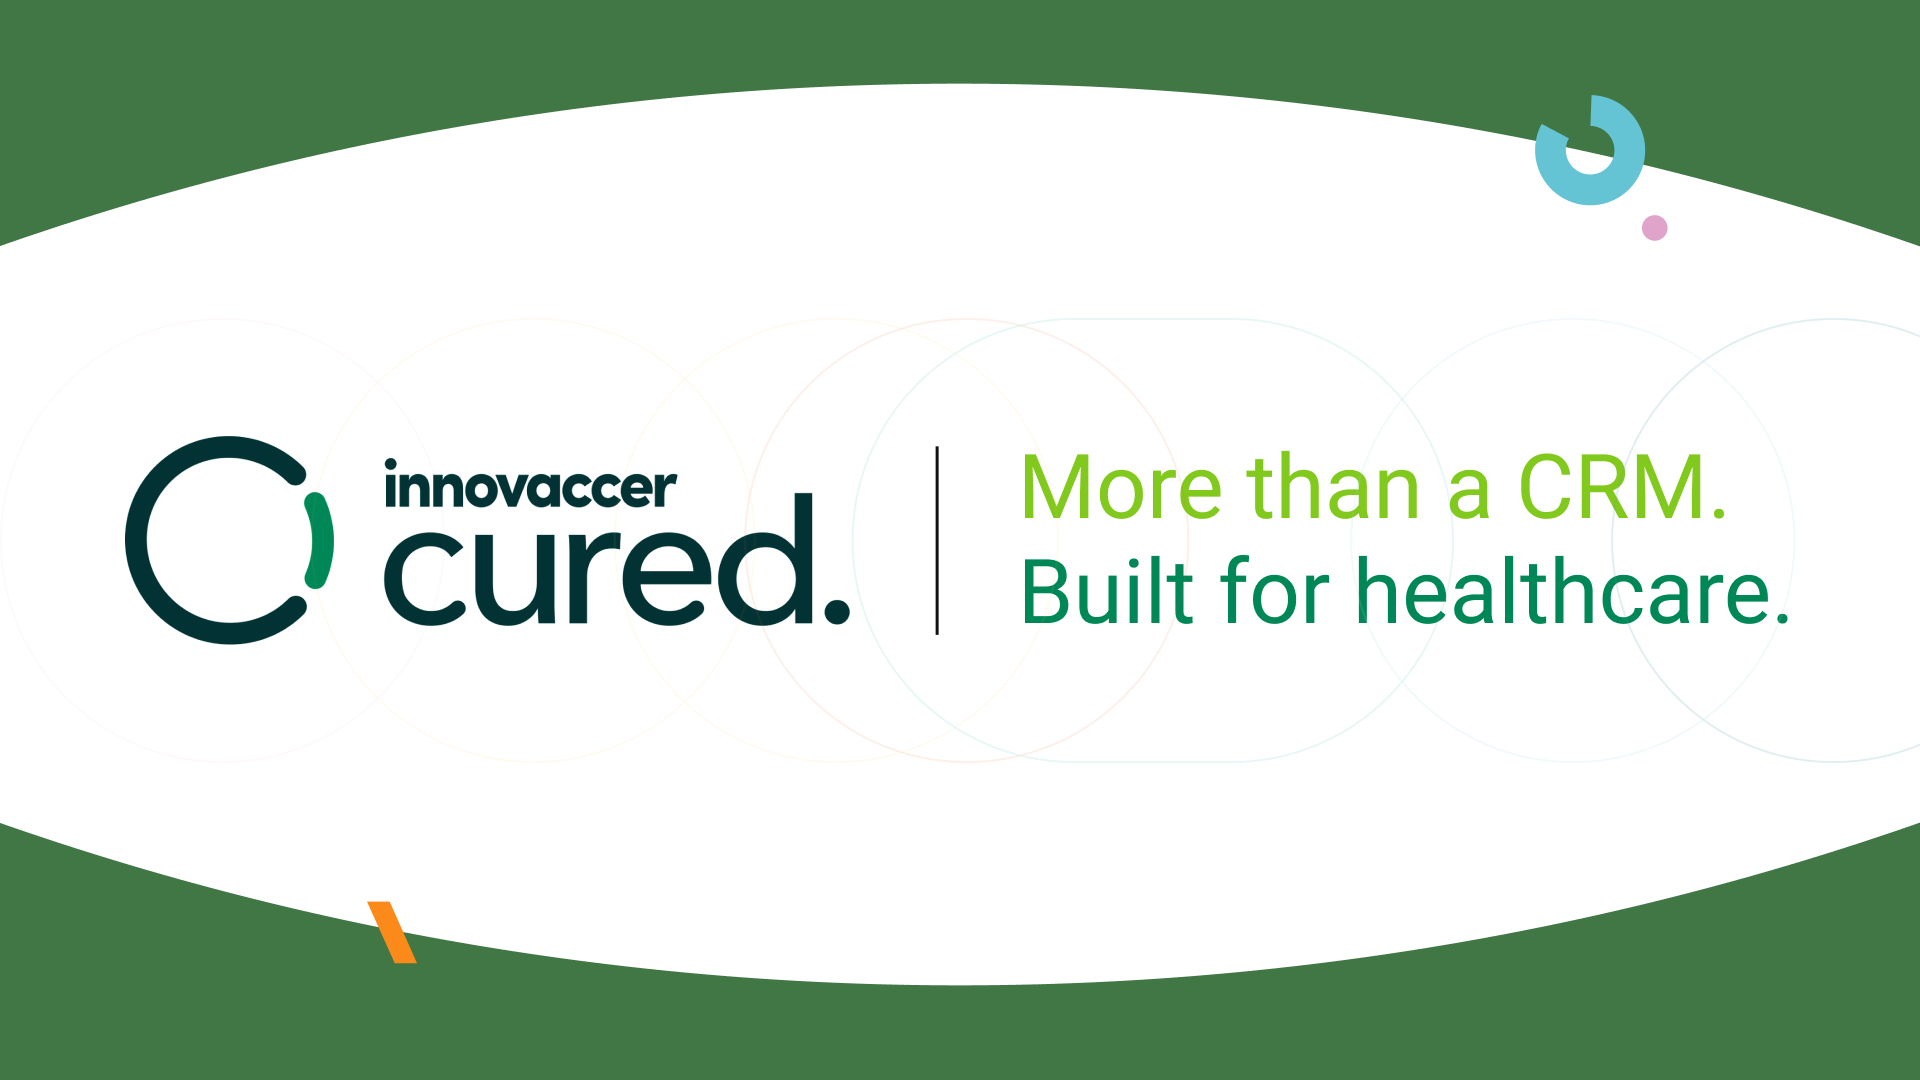 Innovaccer cured logo with tagline 